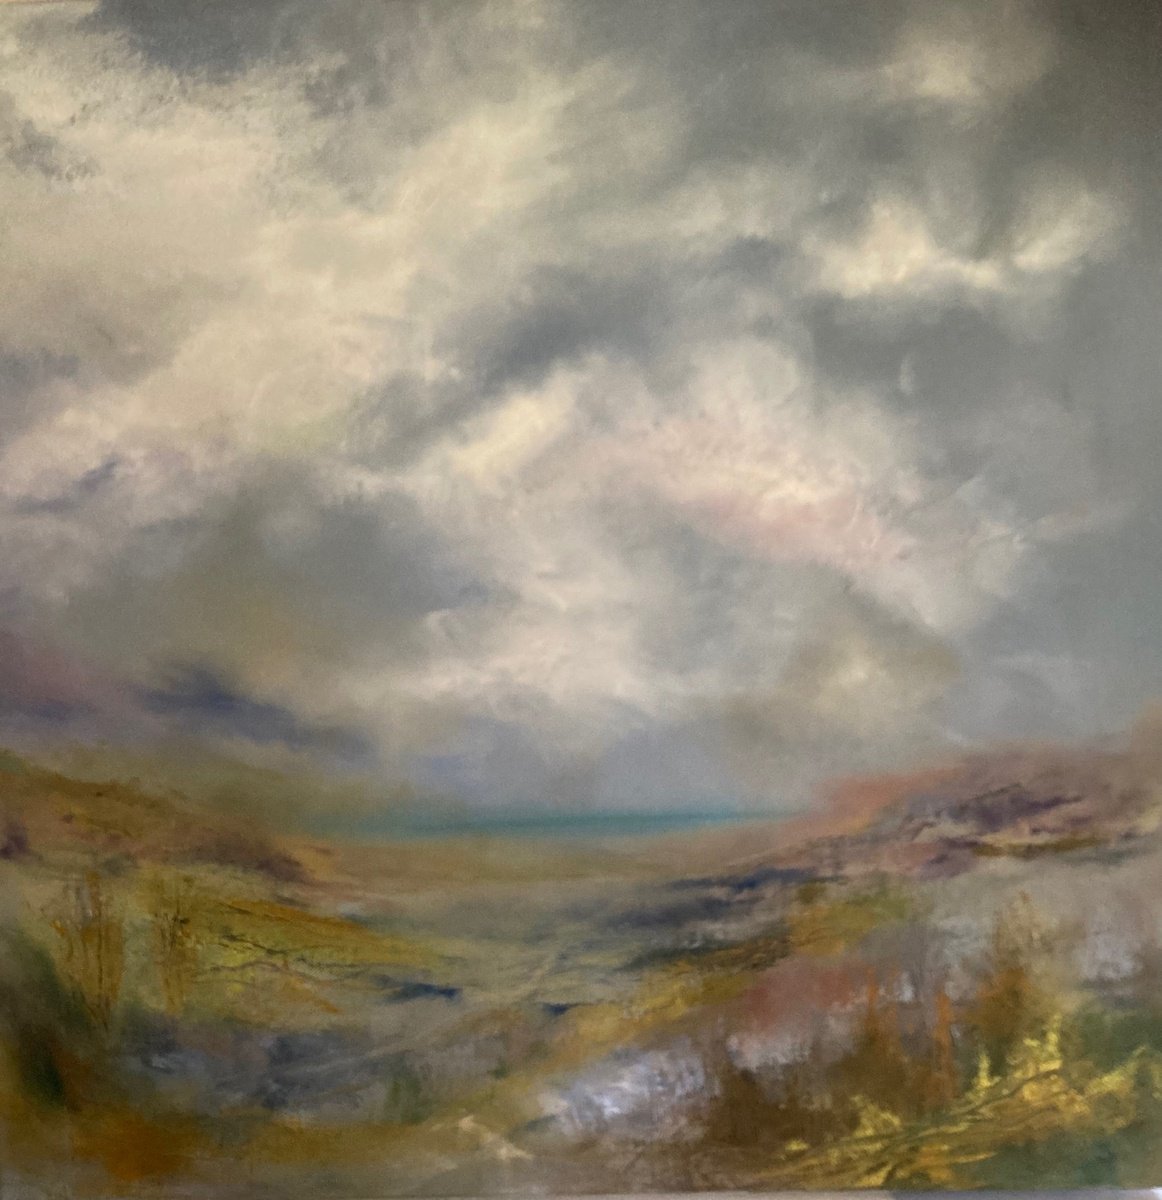 Towards Robin Hood’s Bay by Carol Staines